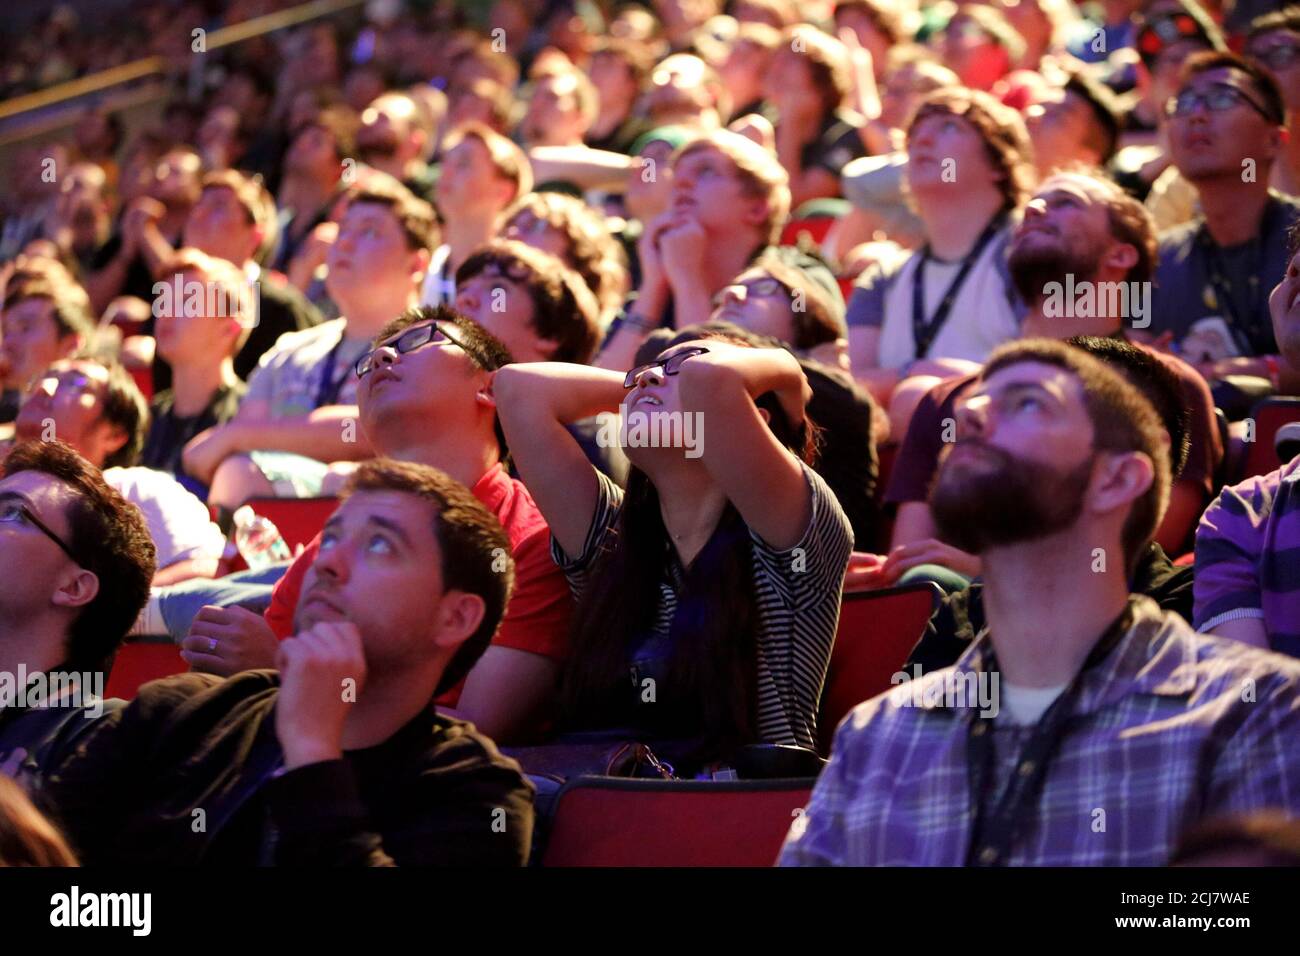 Fans react during The International Dota 2 Championships Key Arena in Seattle, Washington August 8, 2015. Evil Geniuses defeated CDEC Gaming in the Finals to win the title. multiplayer